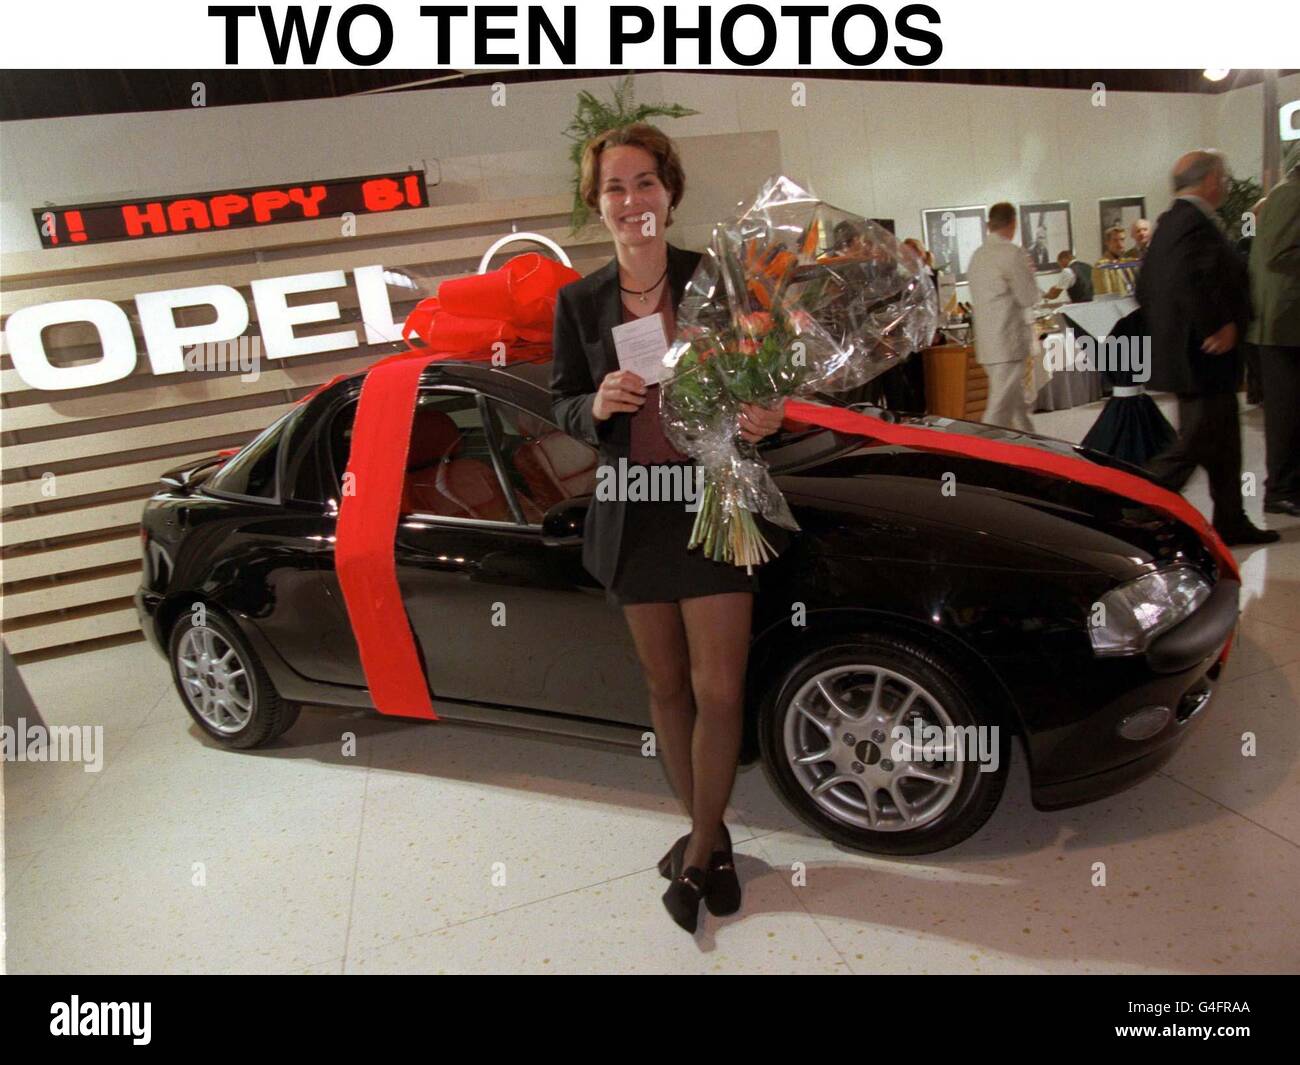 TWO TEN Photos. London 30.9.98: Top-ranked women's tennis player Martina Hingis pictured with her driver's license and her new Opel Tigra, during her birthday party today (Wednesday) at the Grand Slam Cup at the 'Olympiahalle' in Munich. This special 'MH edition' was custom-made for the star. Stock Photo